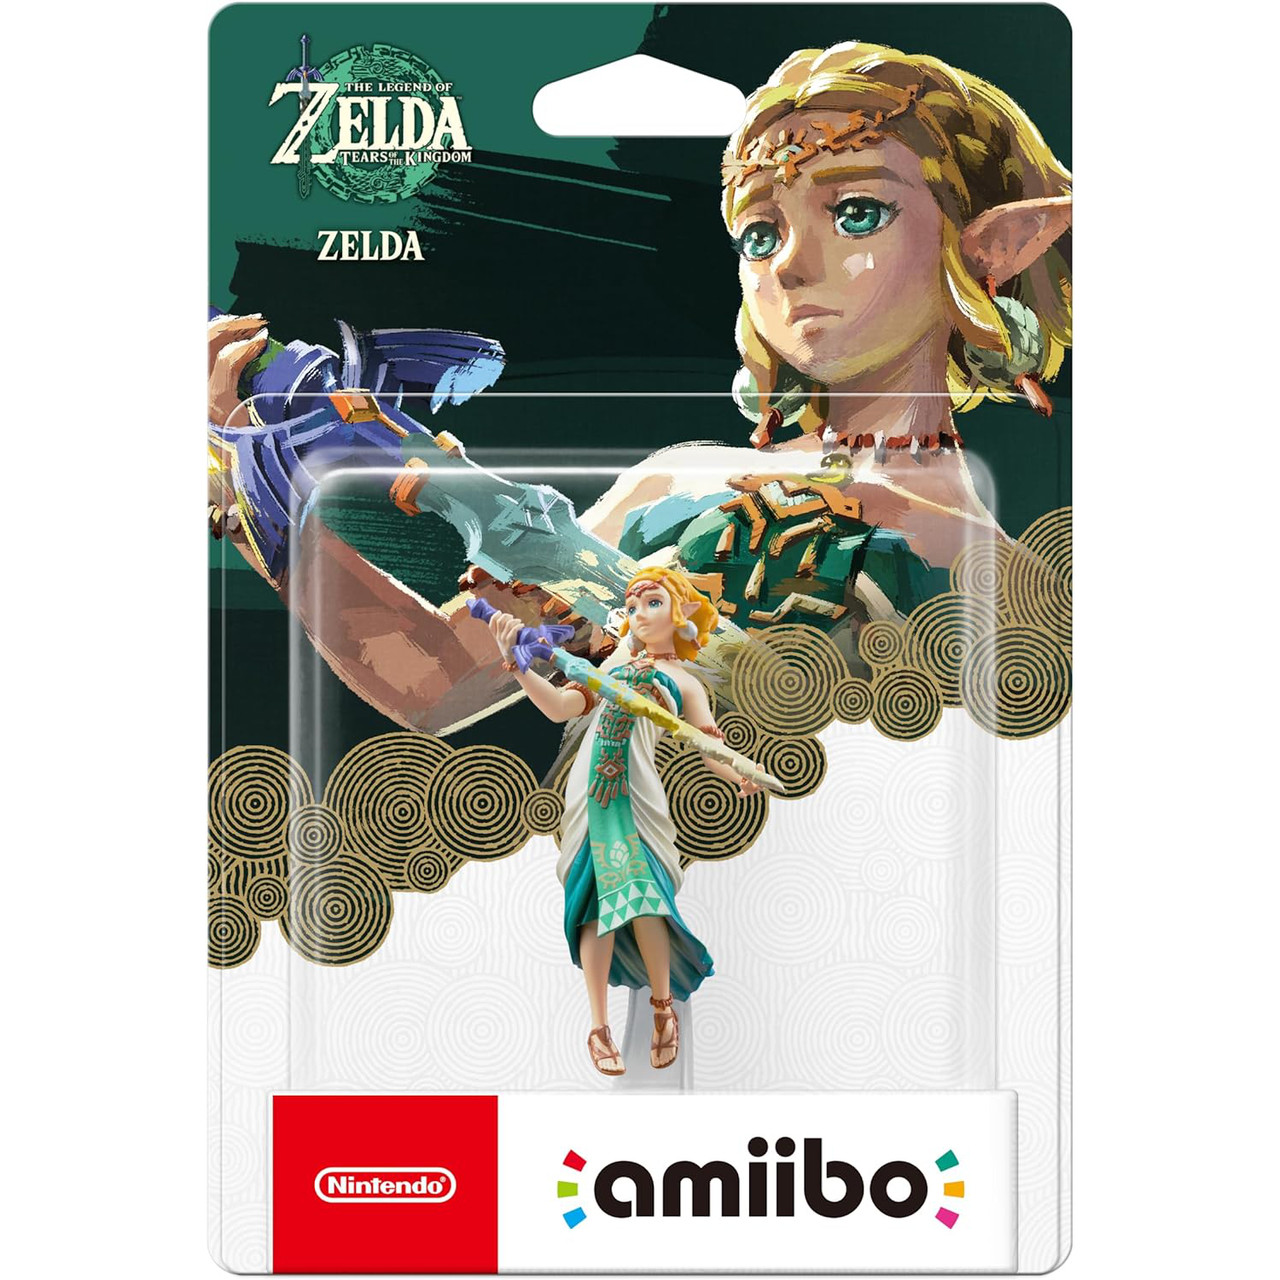 Limited offer] Nintendo Amiibo Link Ocarina of Time The Legend of